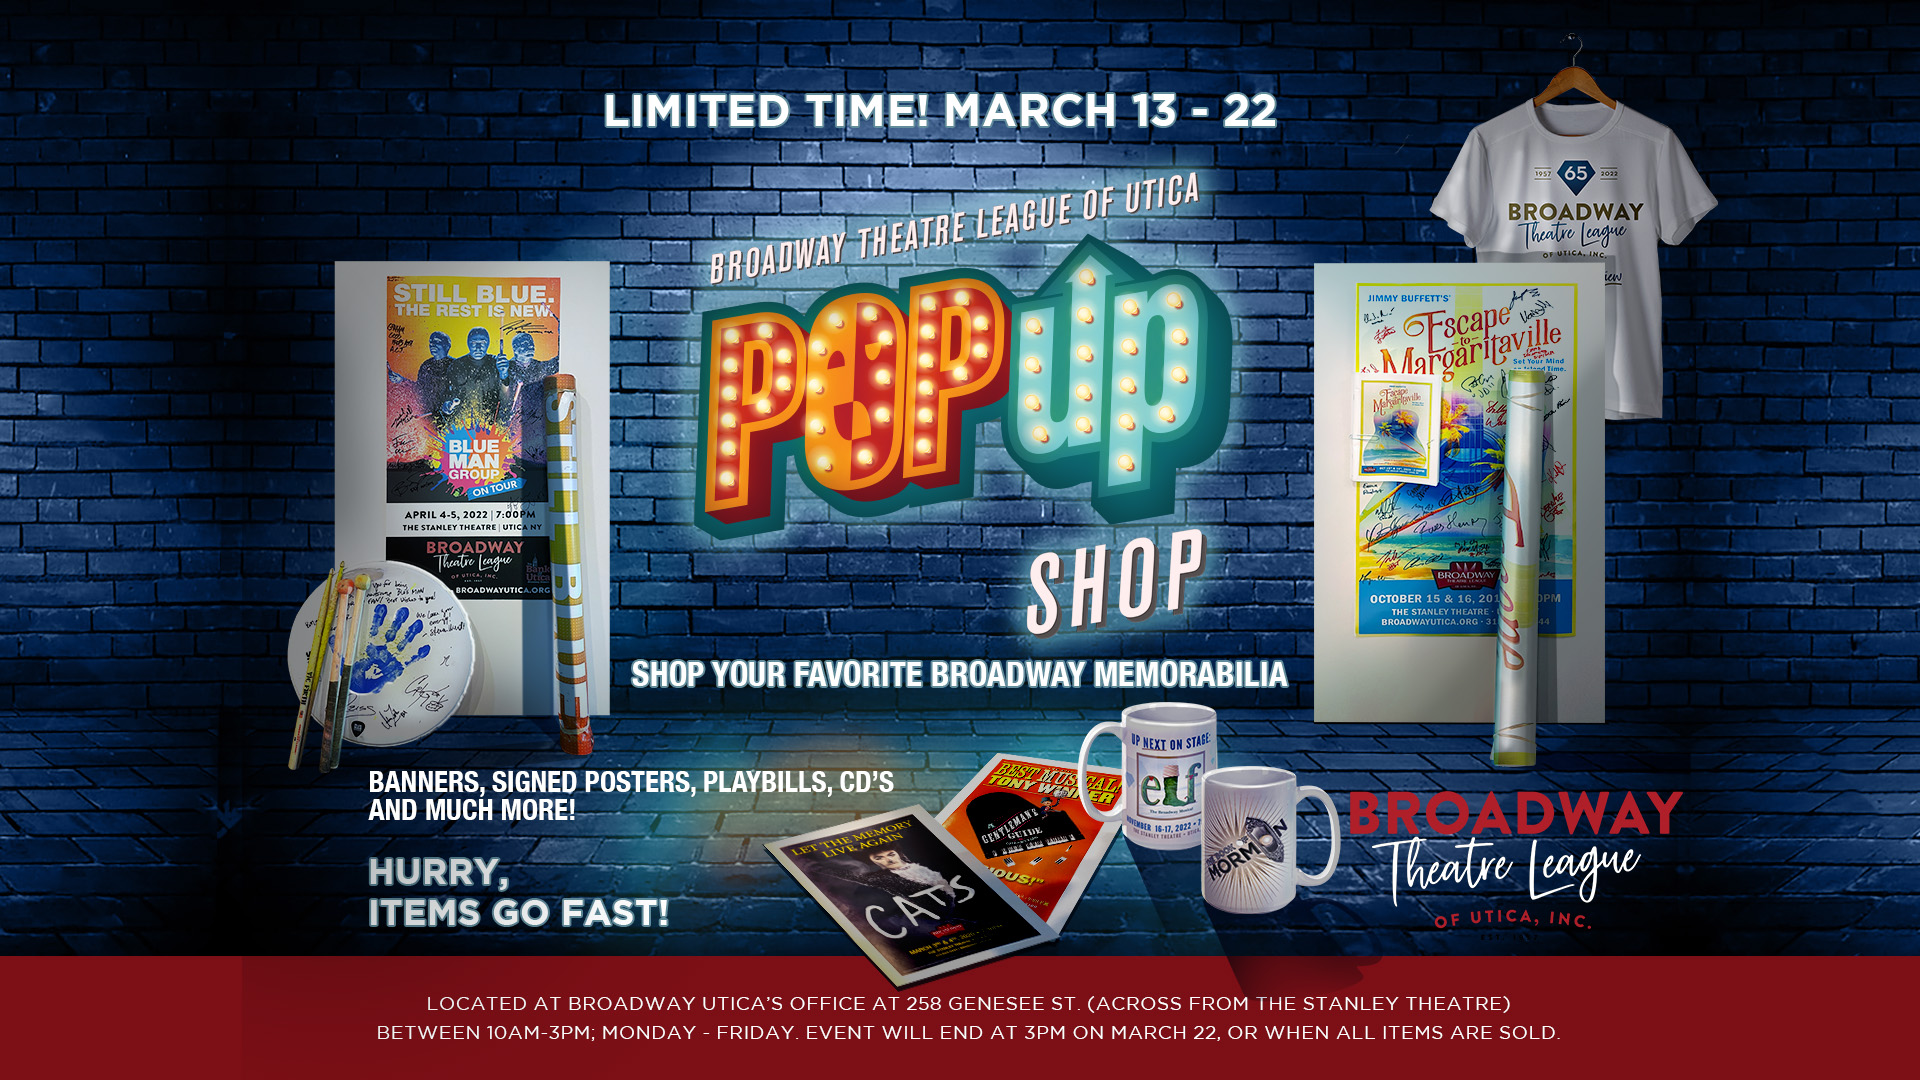 Pop-Up Shop for Broadway Fans at Broadway Theatre League of Utica!